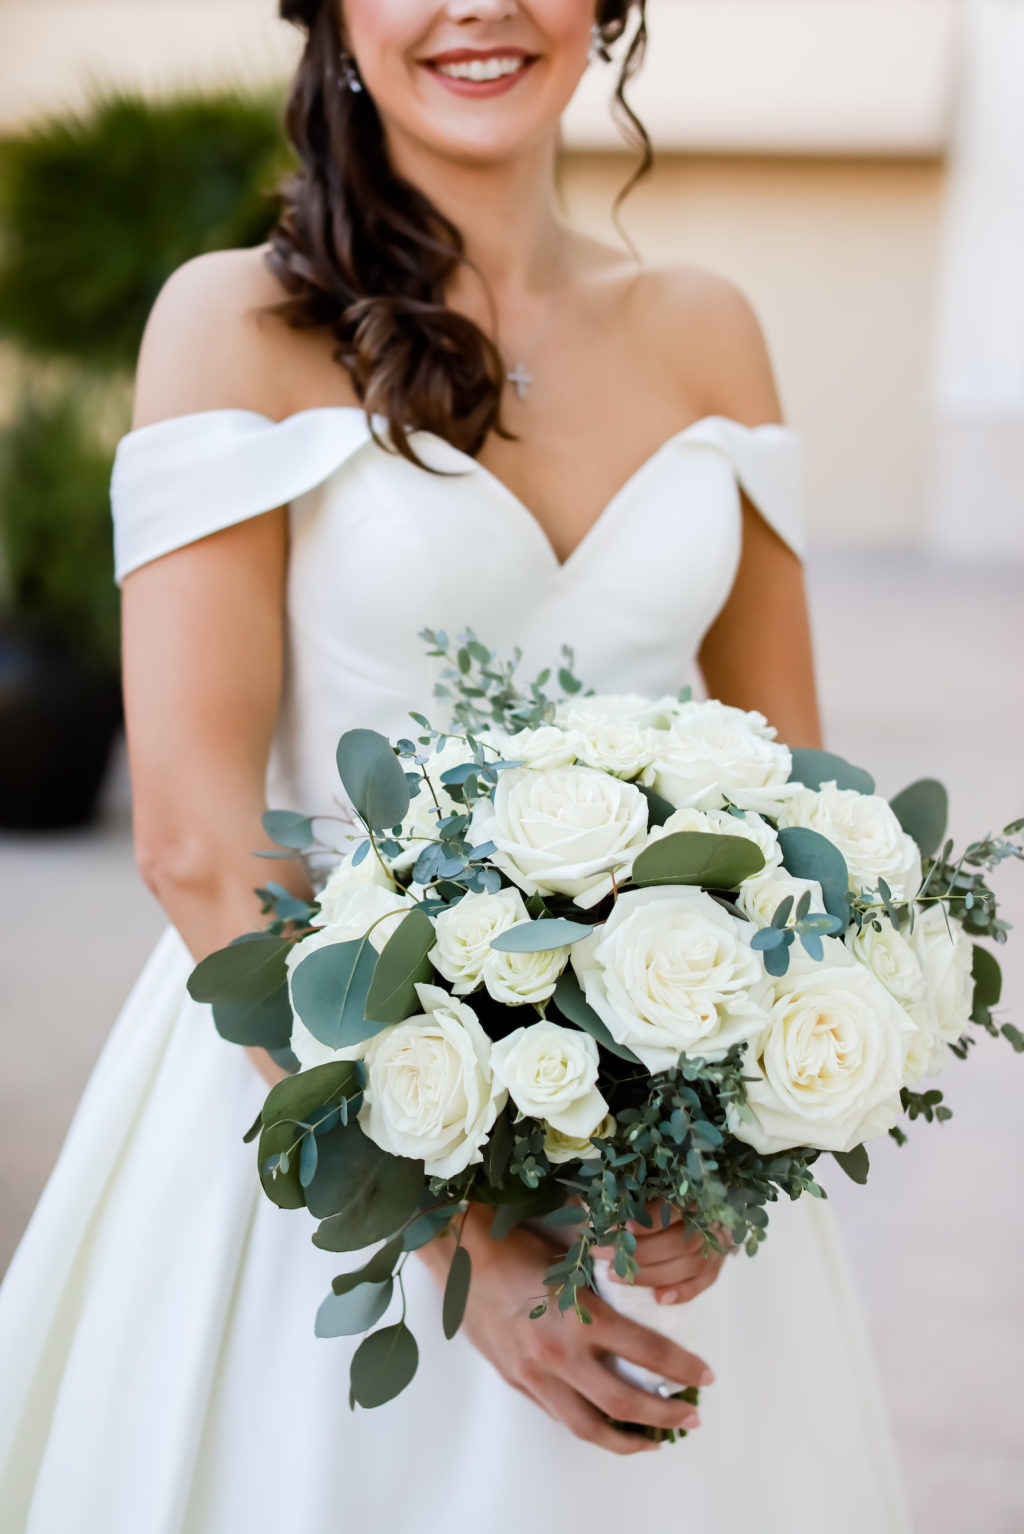 Classic Bride Wearing Off the Shoulder Sweetheart V Neckline Wedding Dress Holding White Roses and Eucalyptus Greenery Floral Bouquet | Tampa Bay Wedding Photographer Lifelong Photography Studio | Clearwater Beach Florist Iza's Flowers